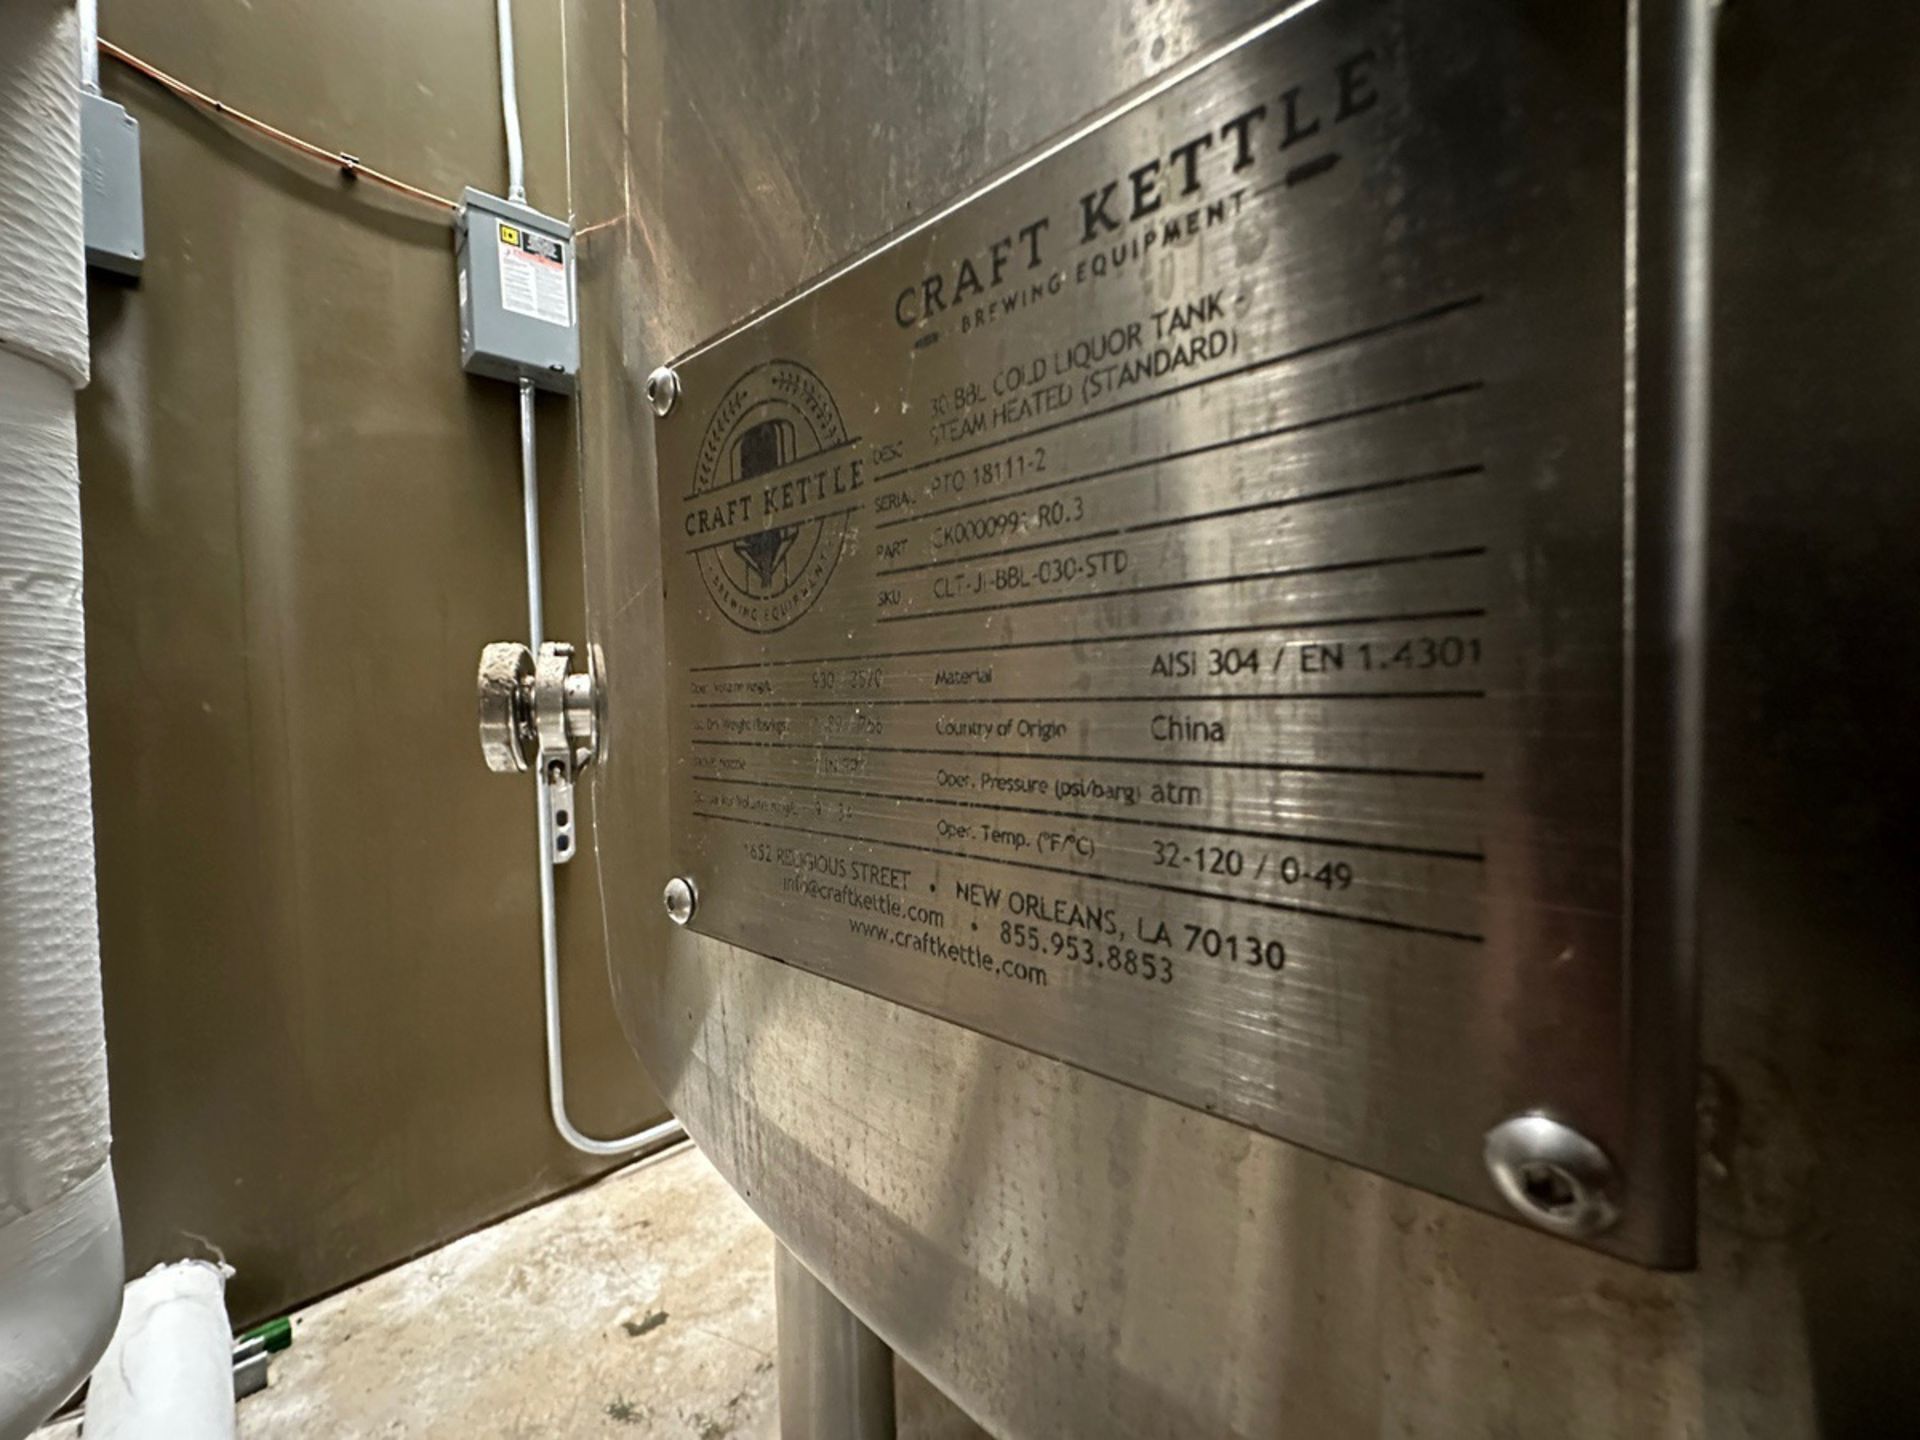 2019 Craft Kettle 30 BBL Cold Liquor Tank (Approx. 5'6" Diameter and 10'6" O.H.) | Rig Fee $1350 - Image 2 of 2